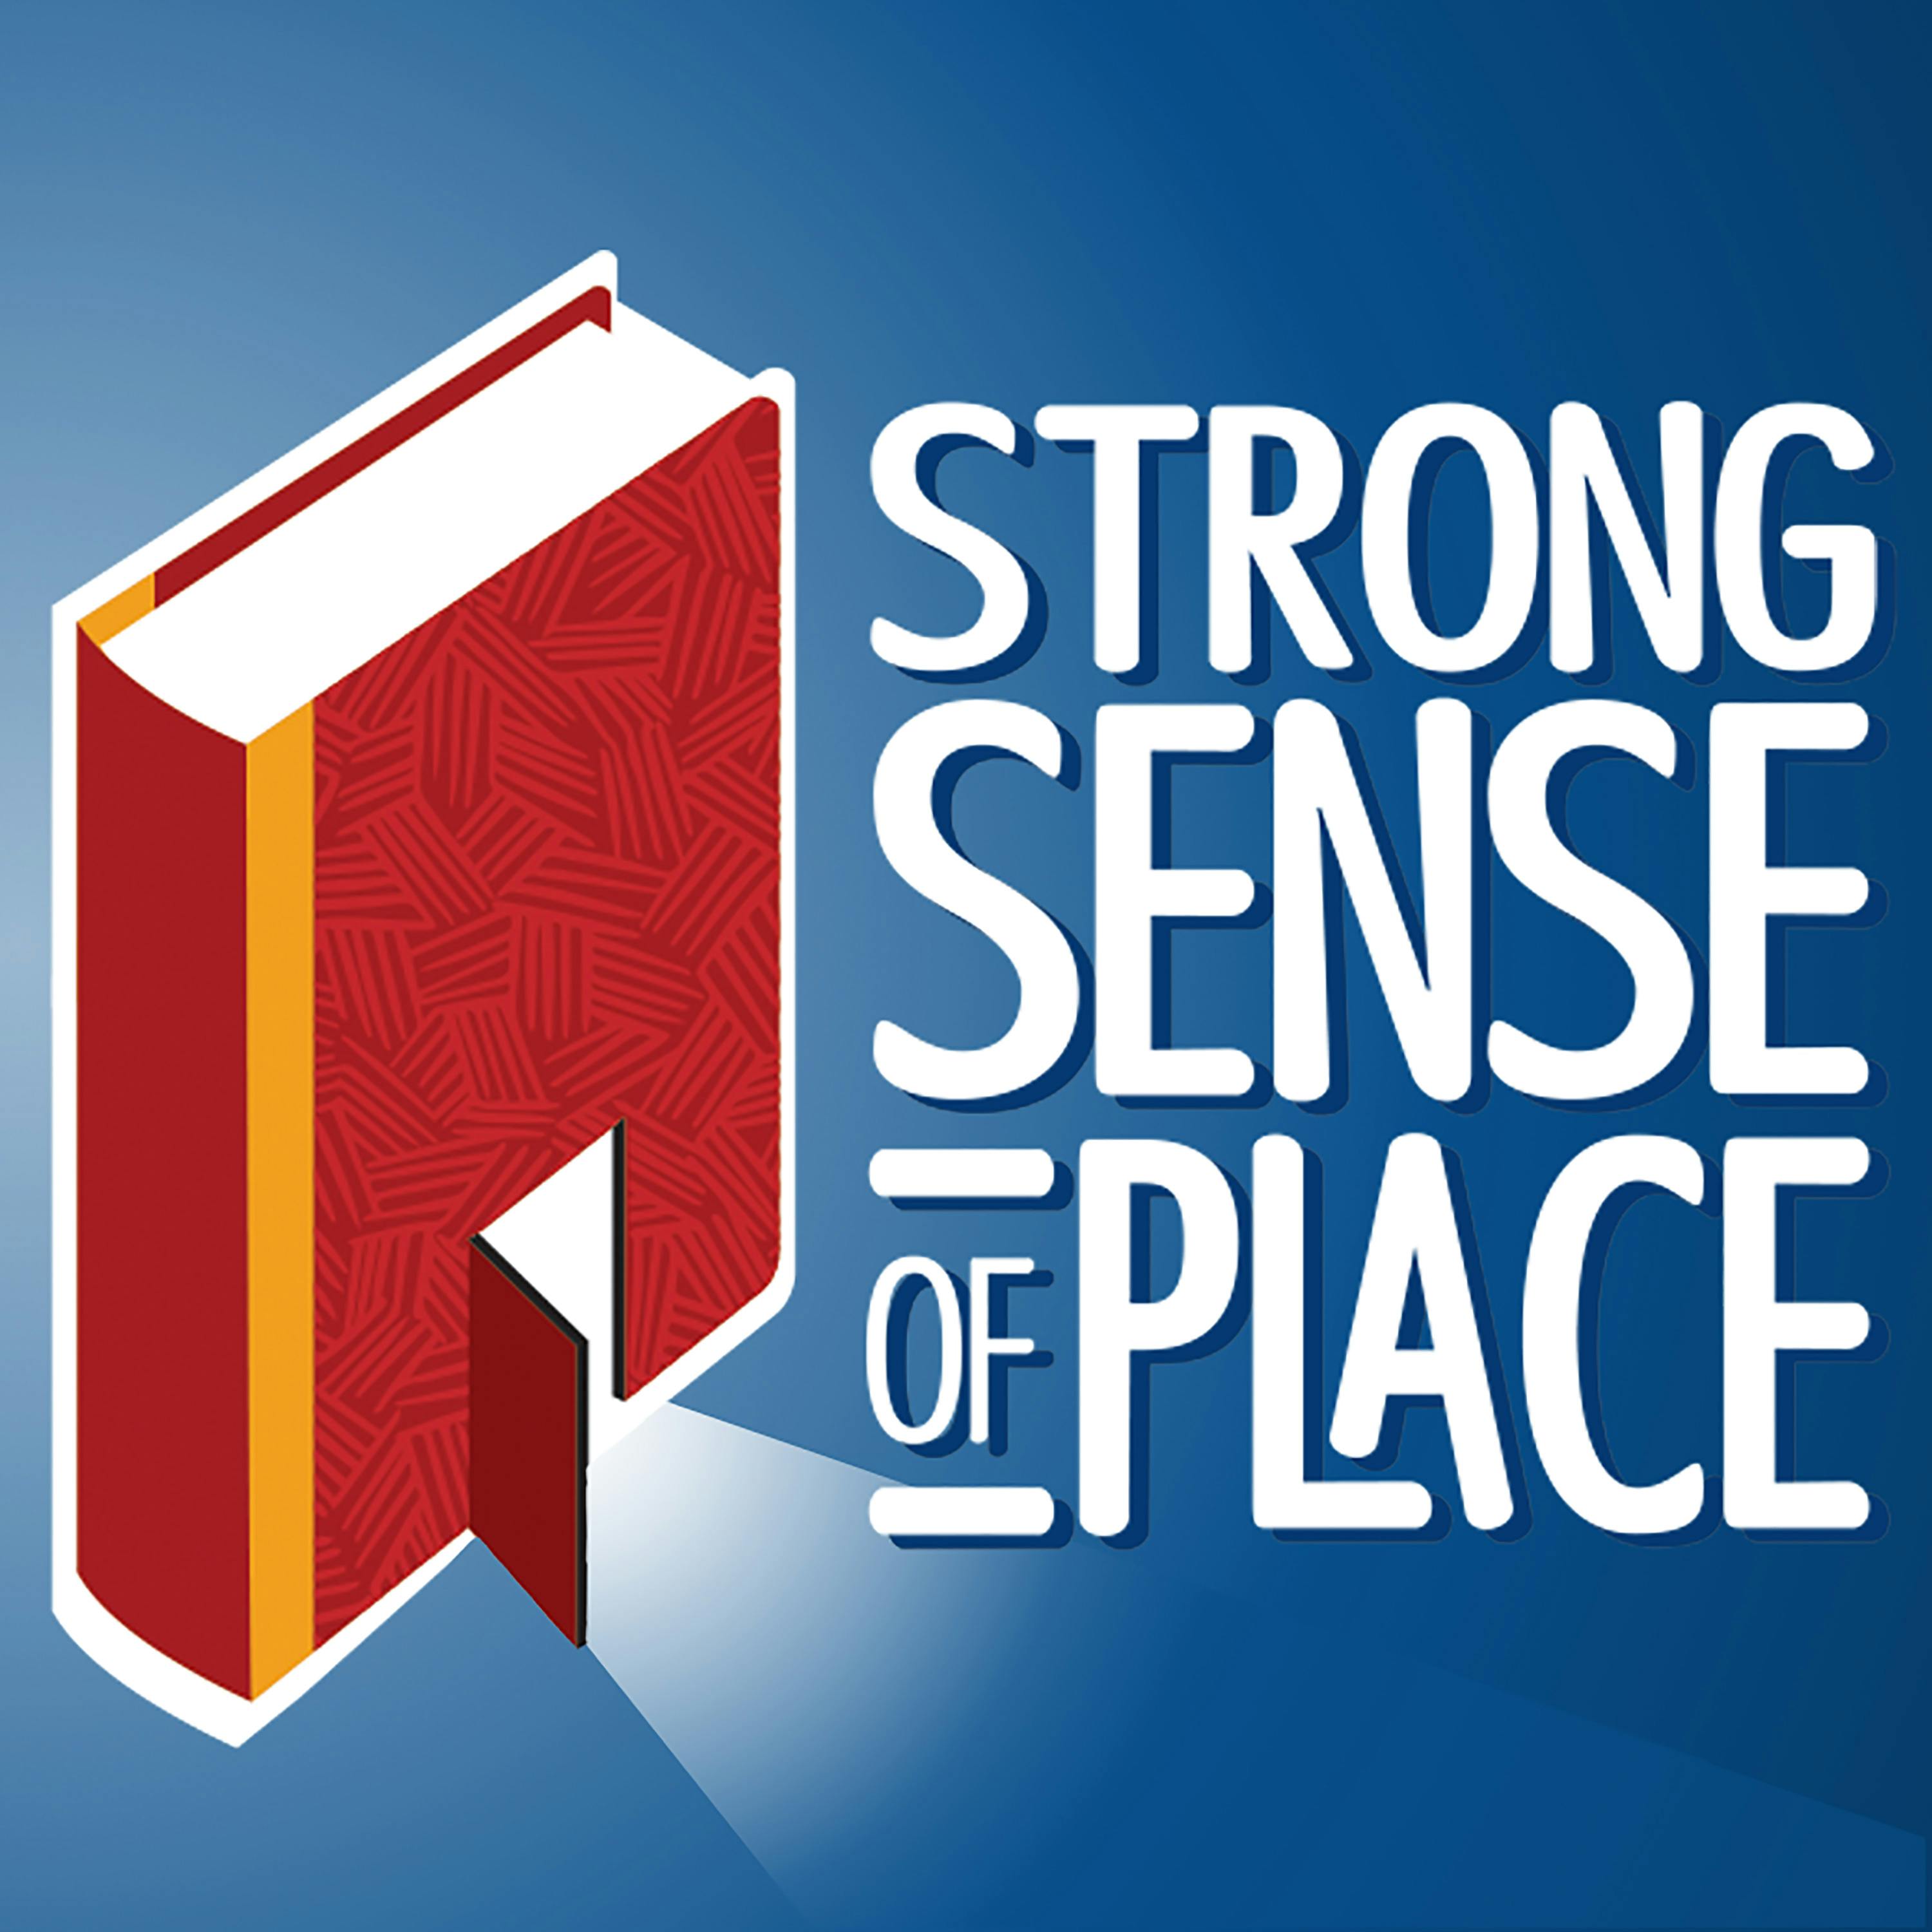 Our Top 10 Books from the First Five Seasons of Strong Sense of Place